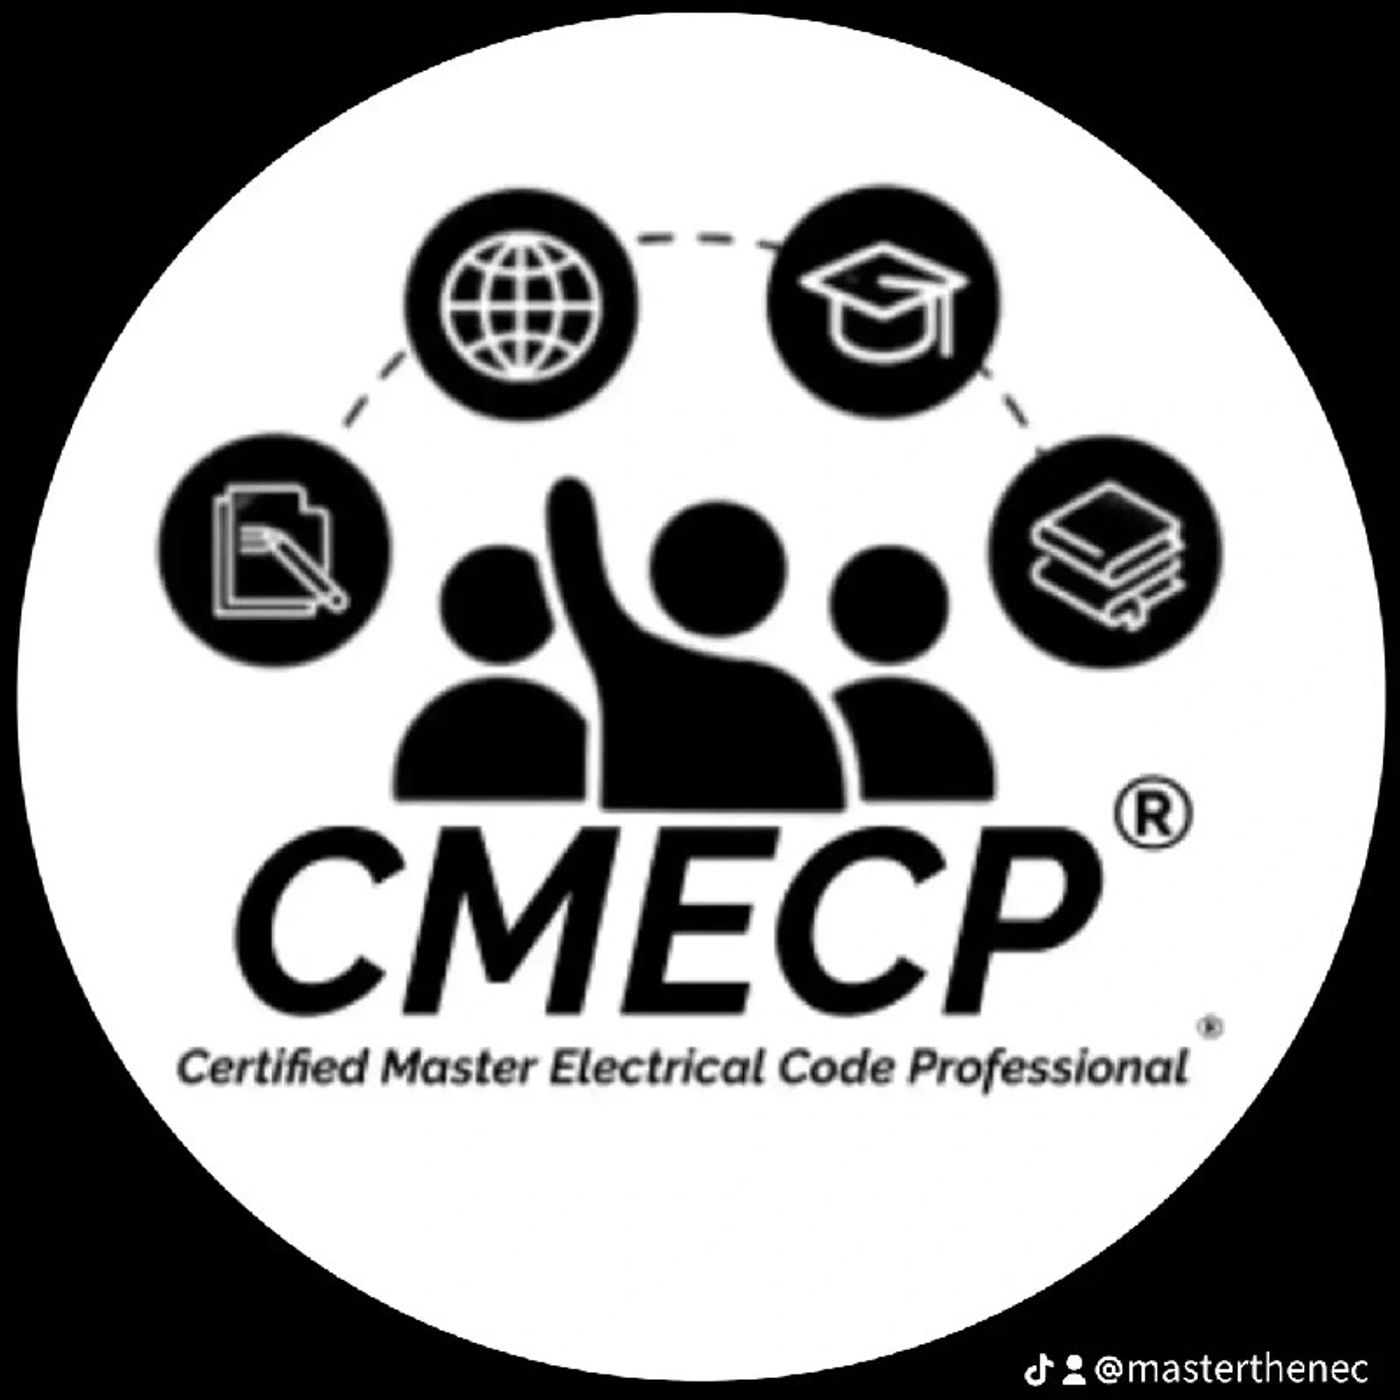 Ask Paul | Benefits of the CMECP Program